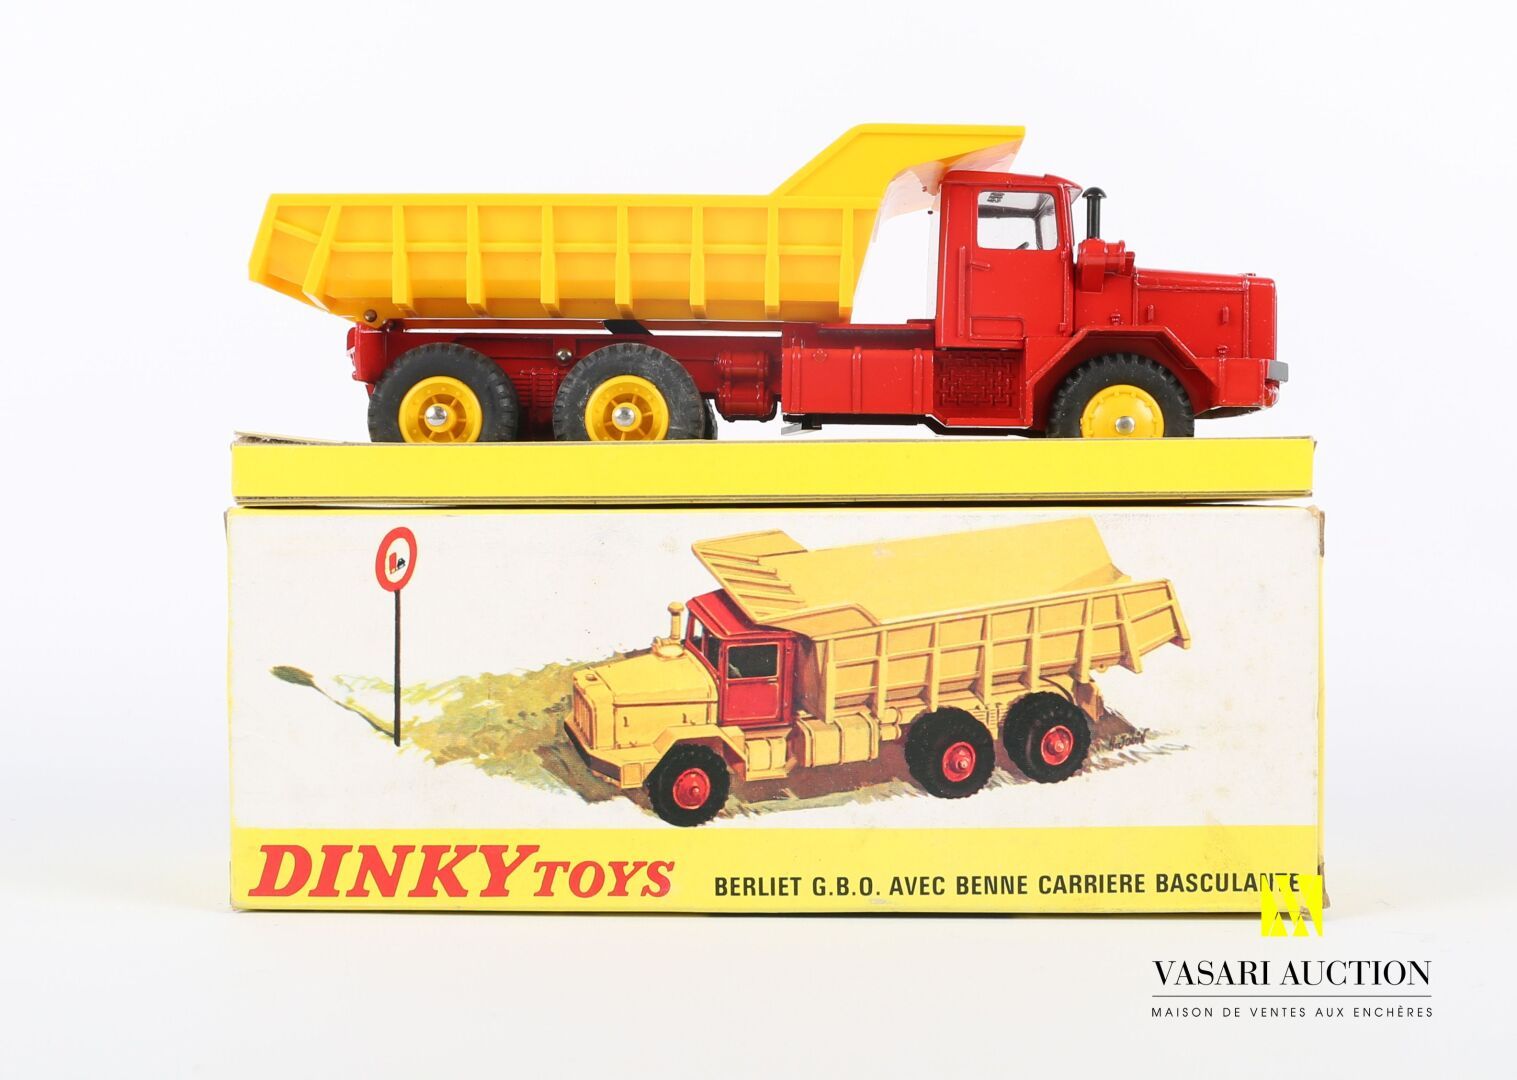 Null DINKY TOYS MECCANO TRIANG (FR)

Berliet G.B.O avec benne carrière basculant&hellip;